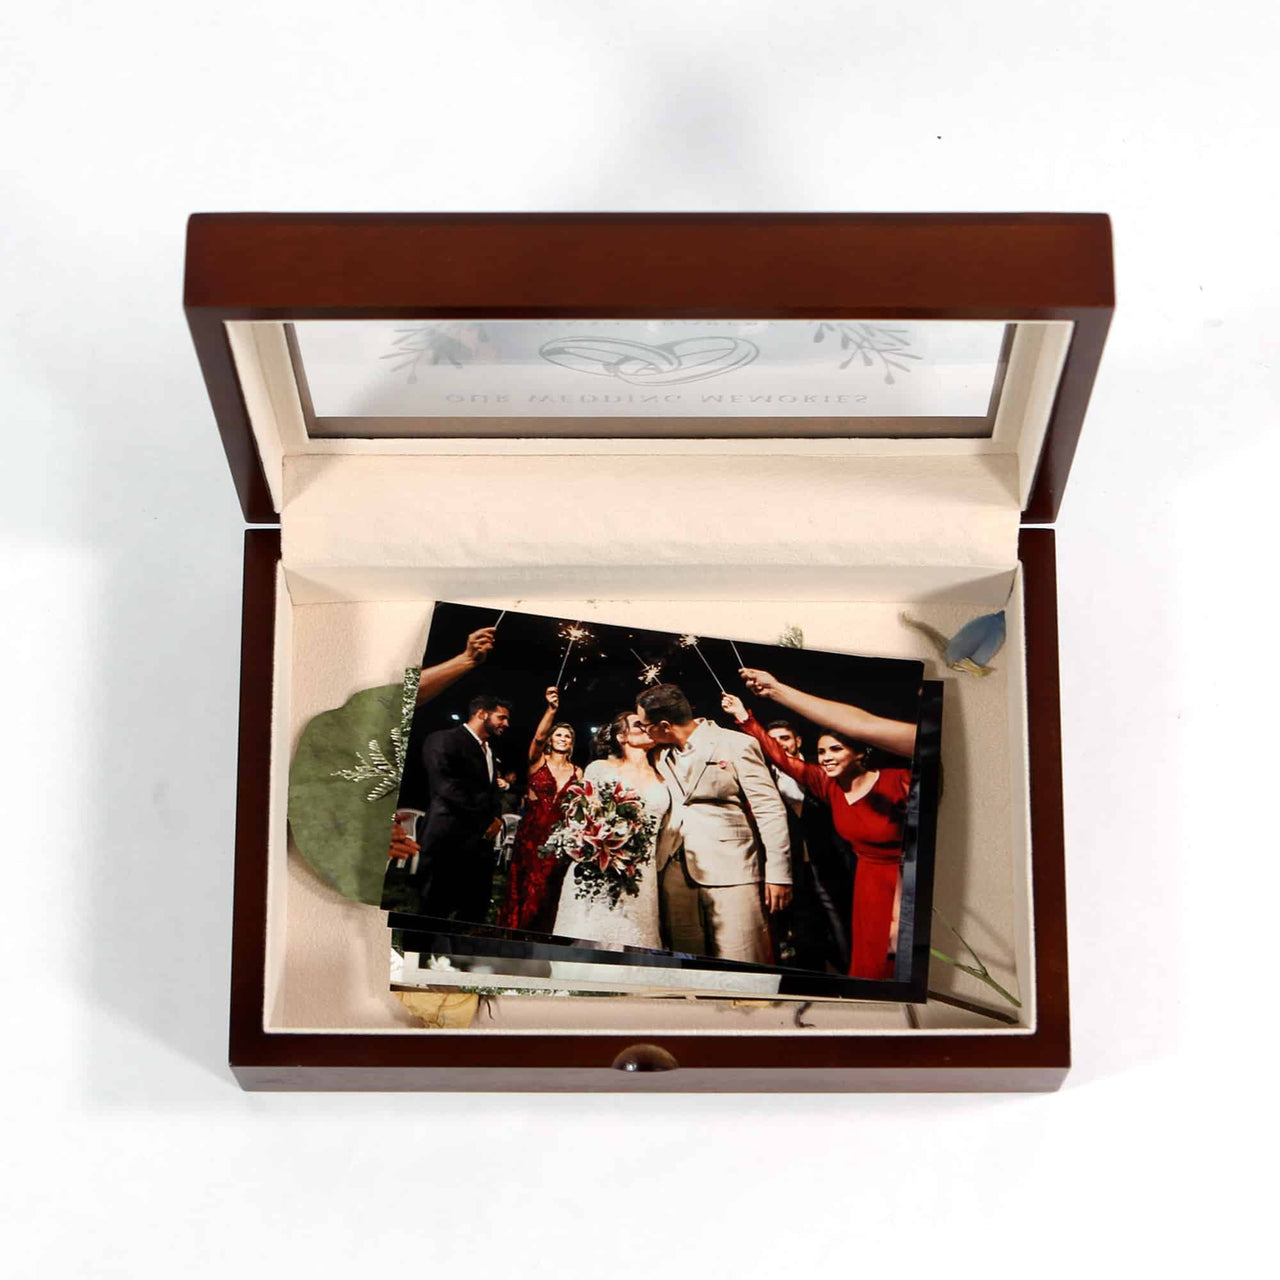 wedding momentos keepsake storage box made from wood with a soft inner lining to protect items from dust and damage